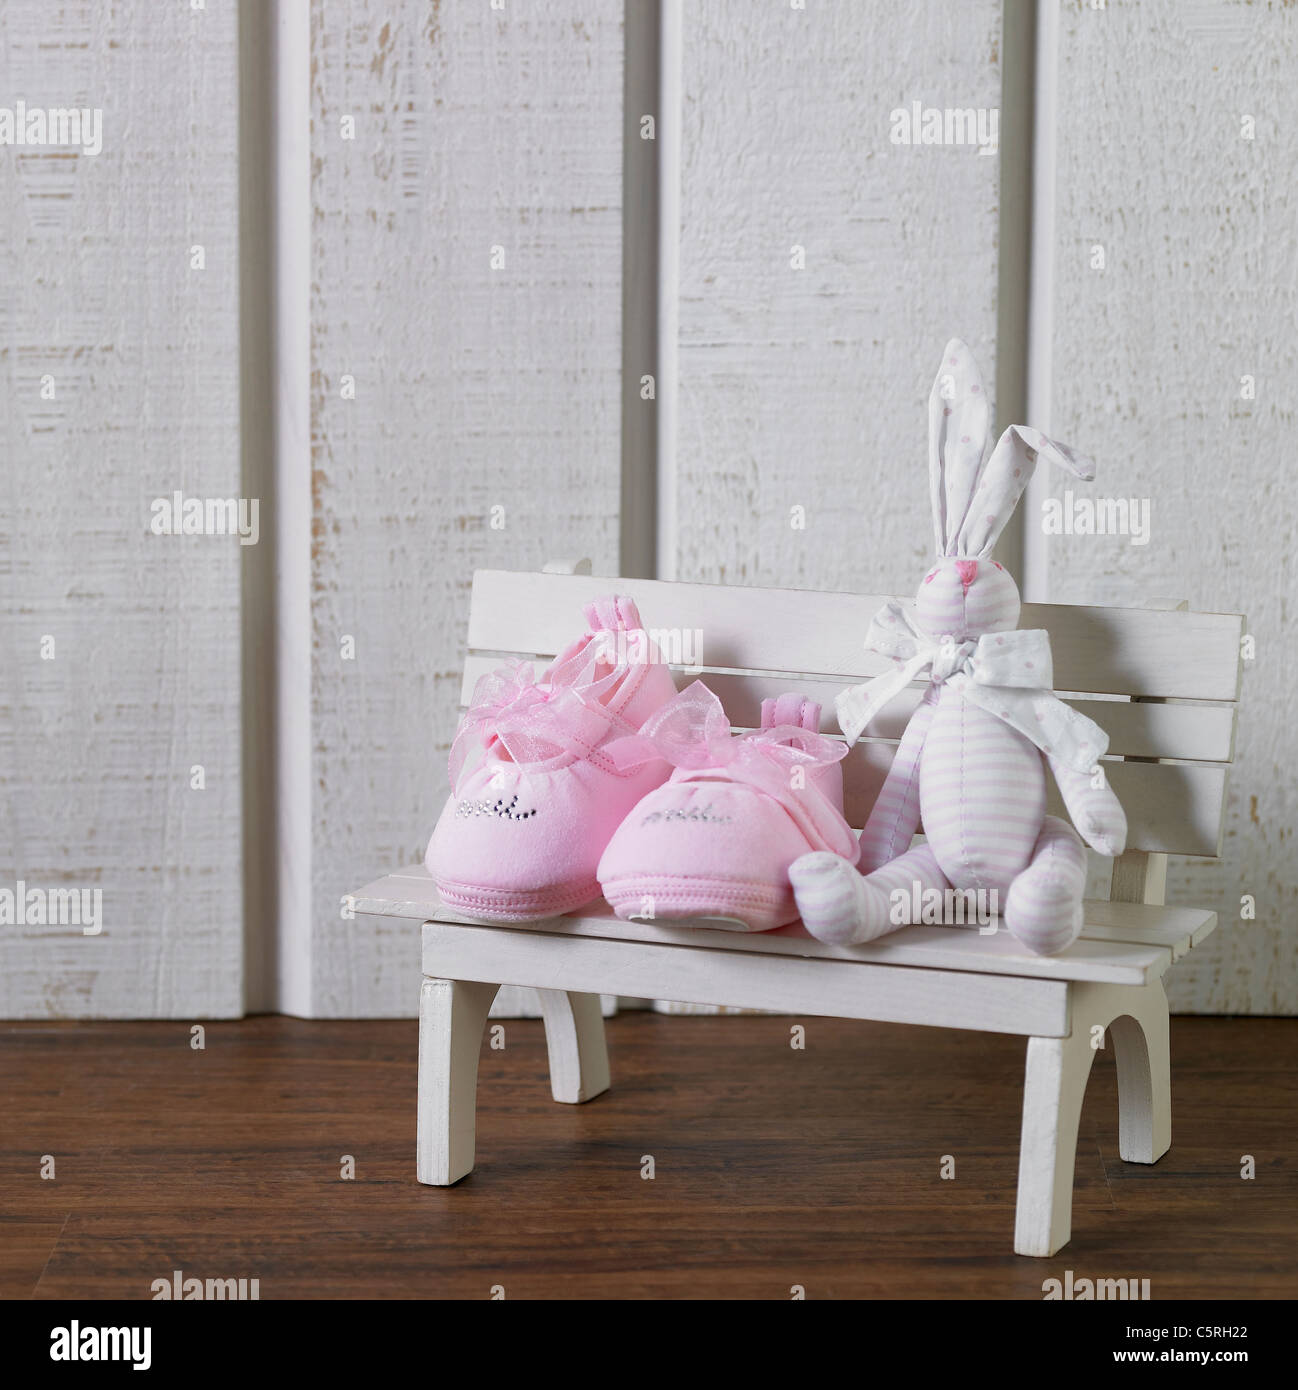 Baby's shoes and a doll on a bench figurine Stock Photo